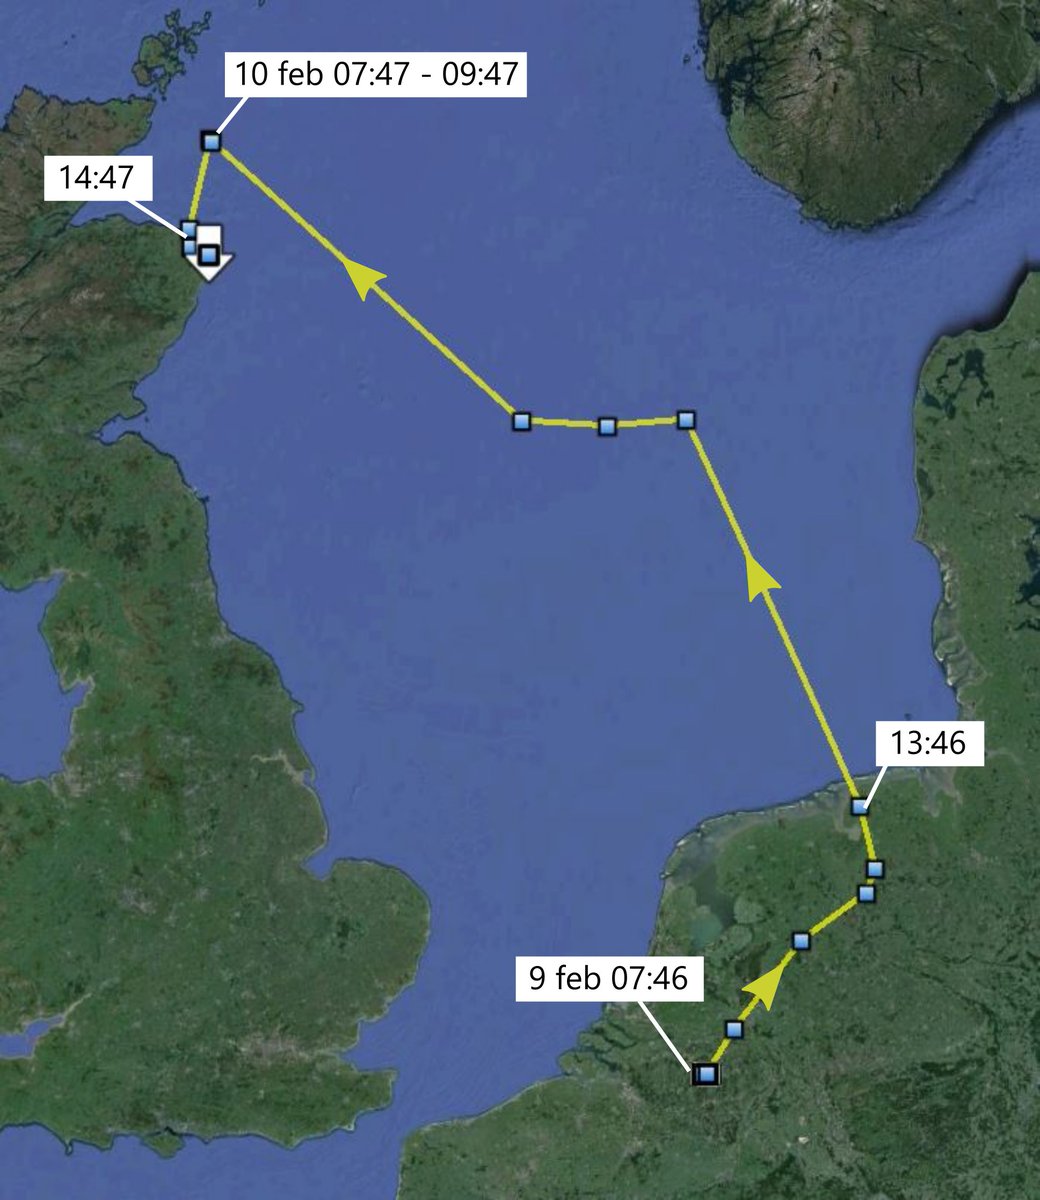 Another first-ever this winter: 360E (Steffen) has gone to Northern Scotland! He left NL towards the north on 9 Feb, steared west and rested at sea on the morning of the 10th. He is currently staying just south of Mintlaw. Anybody know people there that could go and look him up?